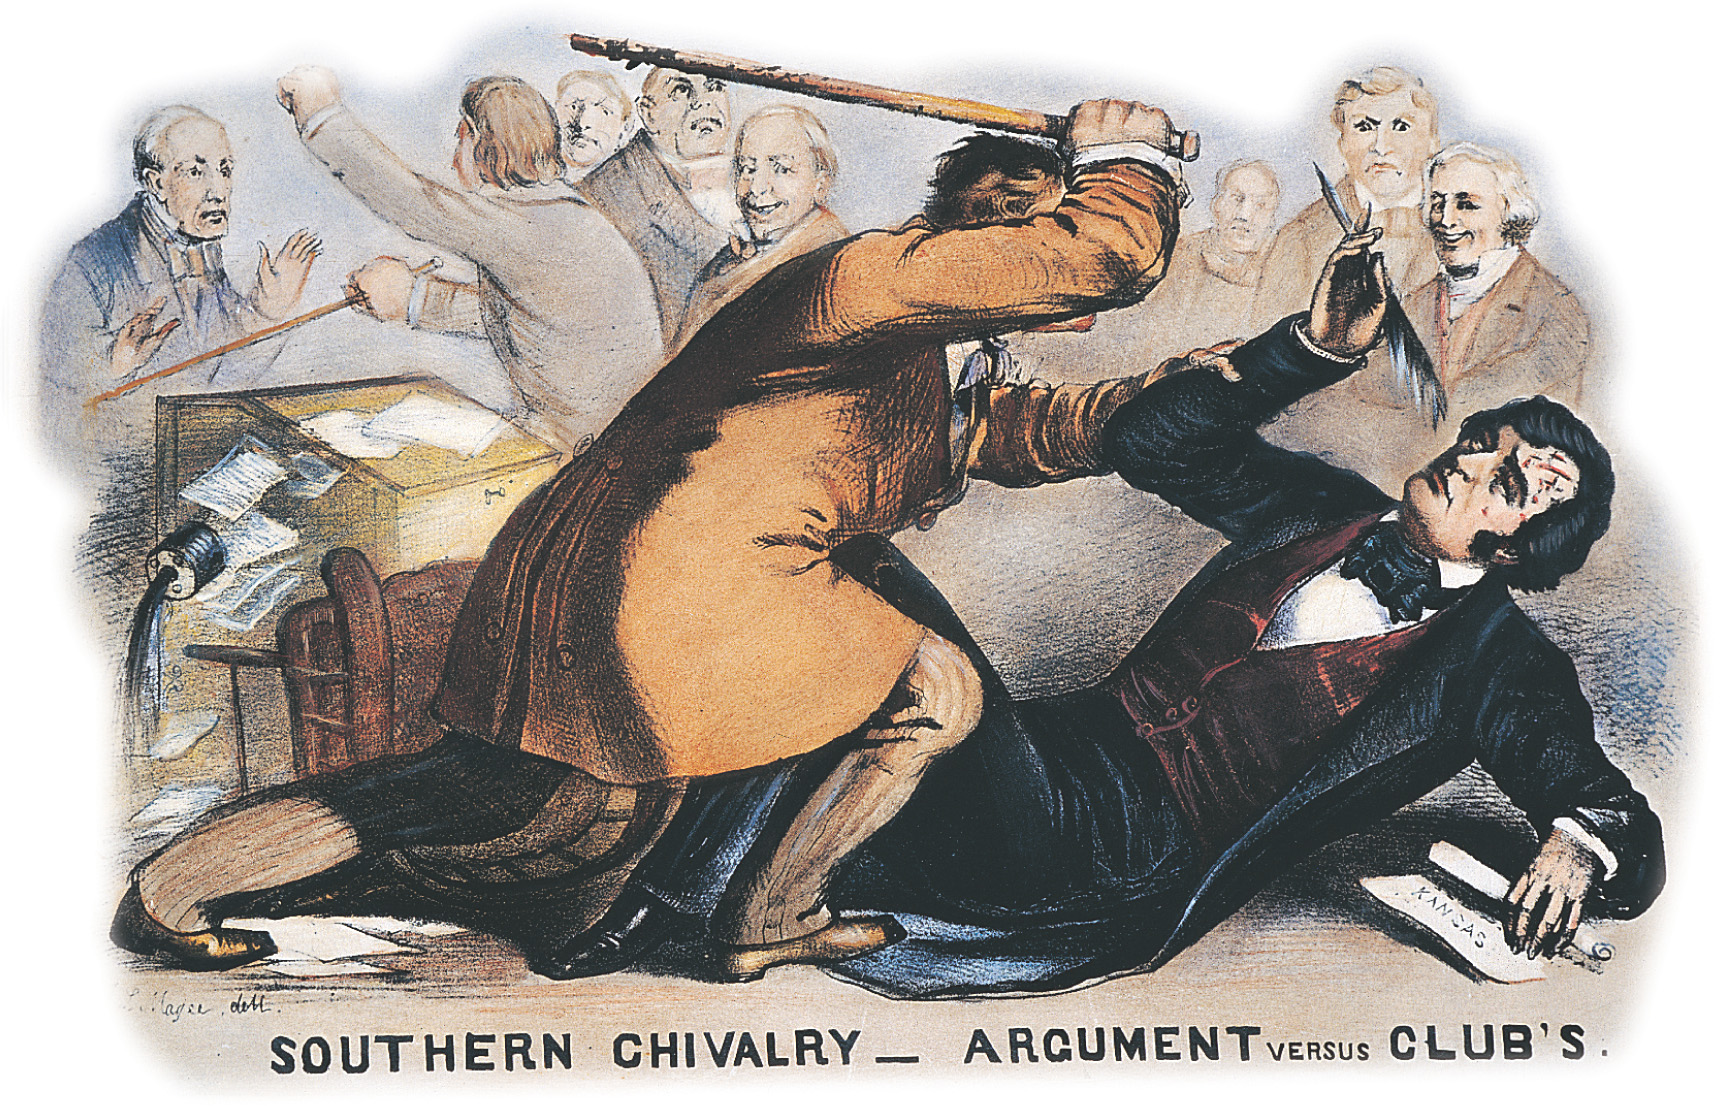 A cartoon shows a man with a cane attacking another man who holds a quill pen. The caption reads Southern chivalry- argument versus clubs.